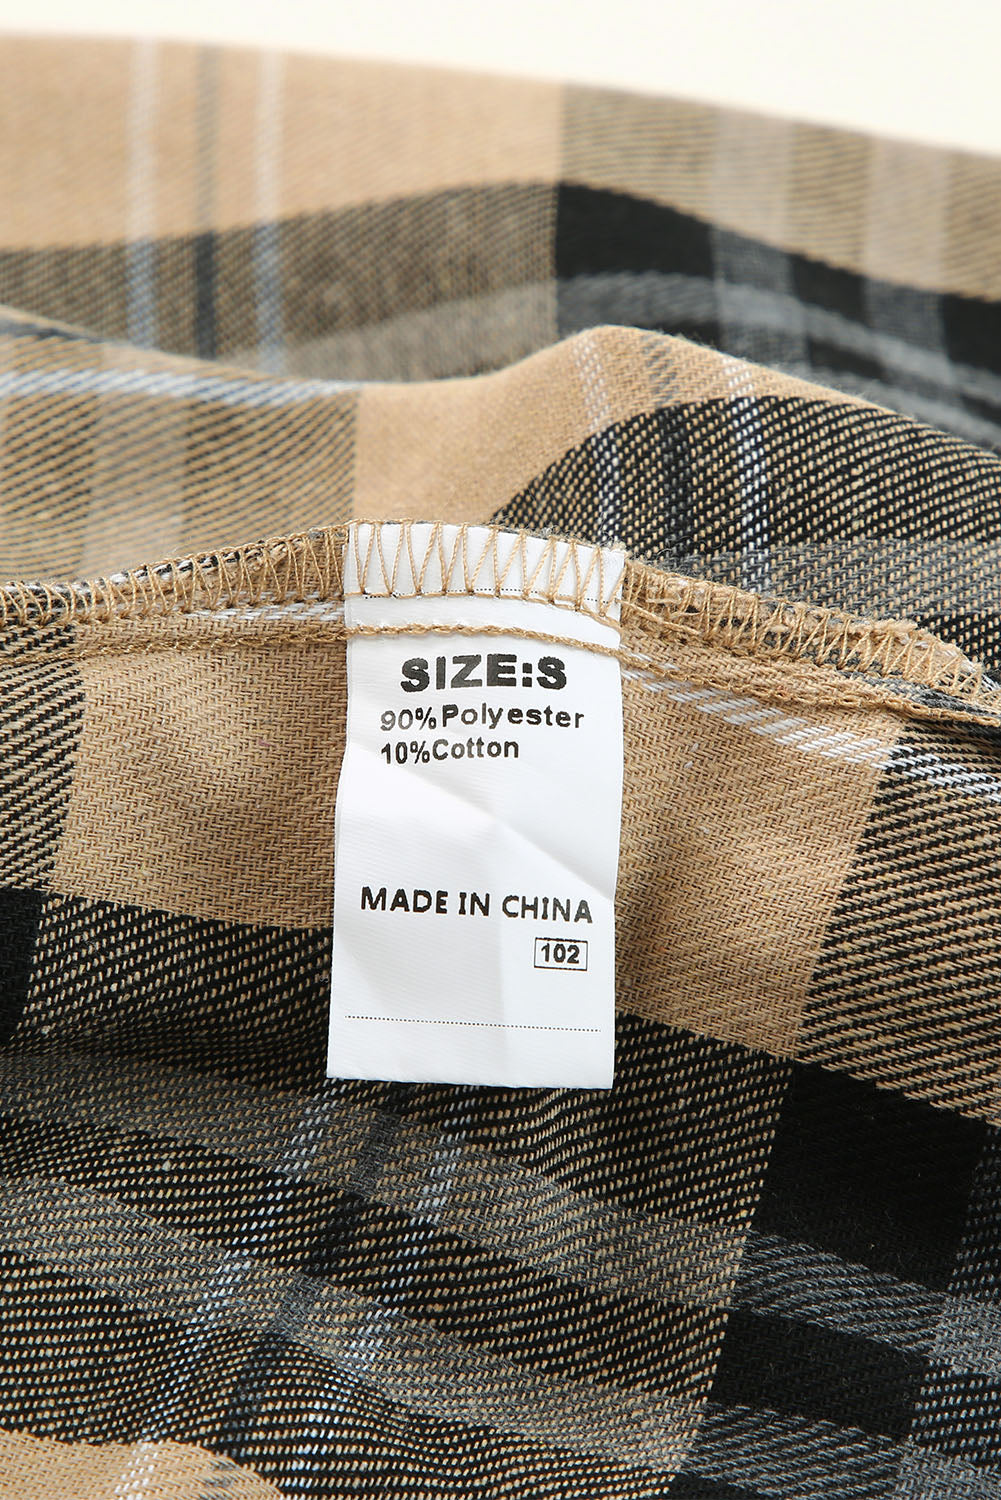 Fall Zest 100% Cotton Plaid Shirt | Hypoallergenic - Allergy Friendly - Naturally Free